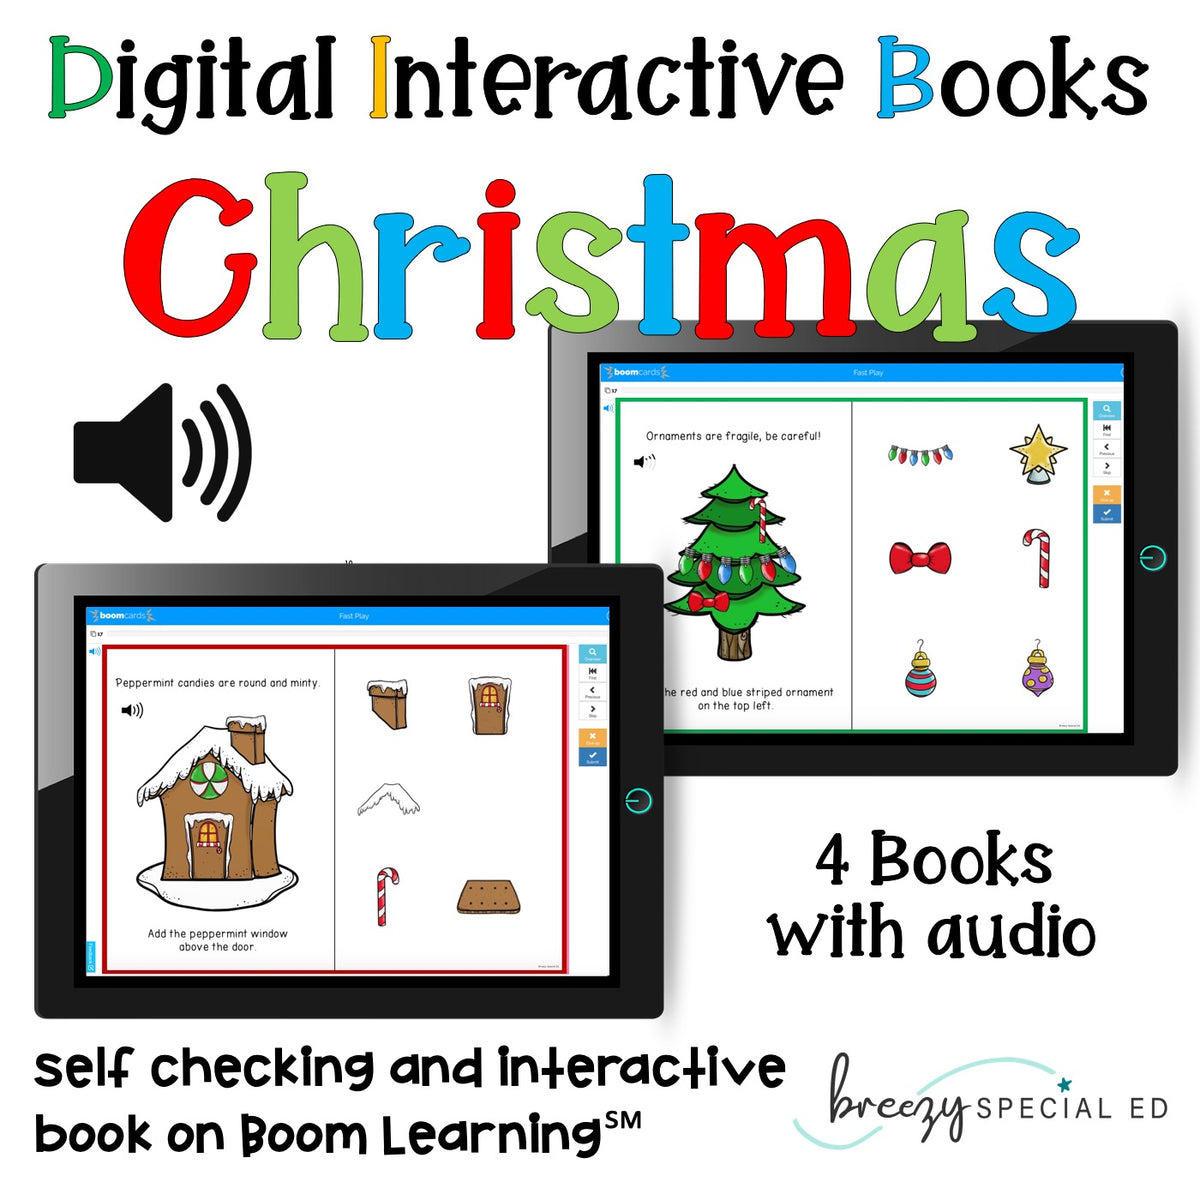 Digital Stickers for Google and Seesaw Seasonal Holiday BUNDLE - A